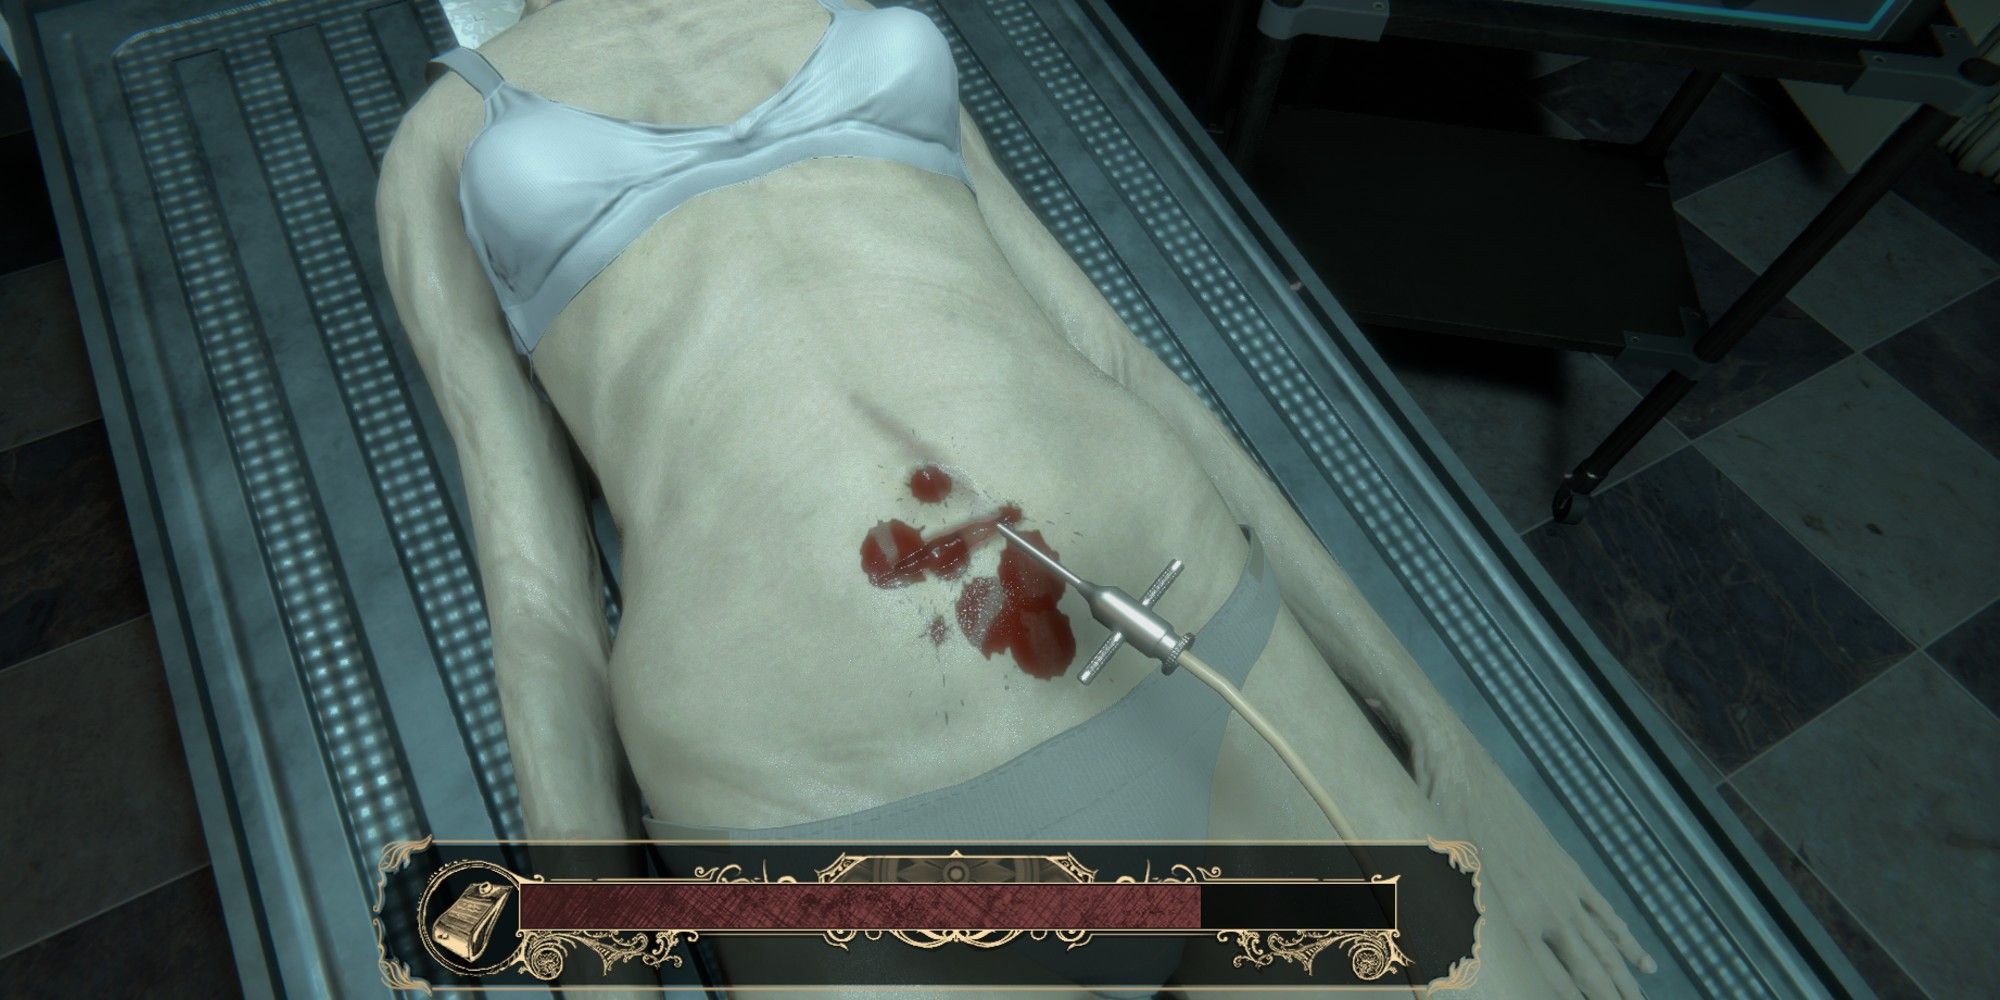 Blood drips onto the torso as you work on a body in The Mortuary Assistant